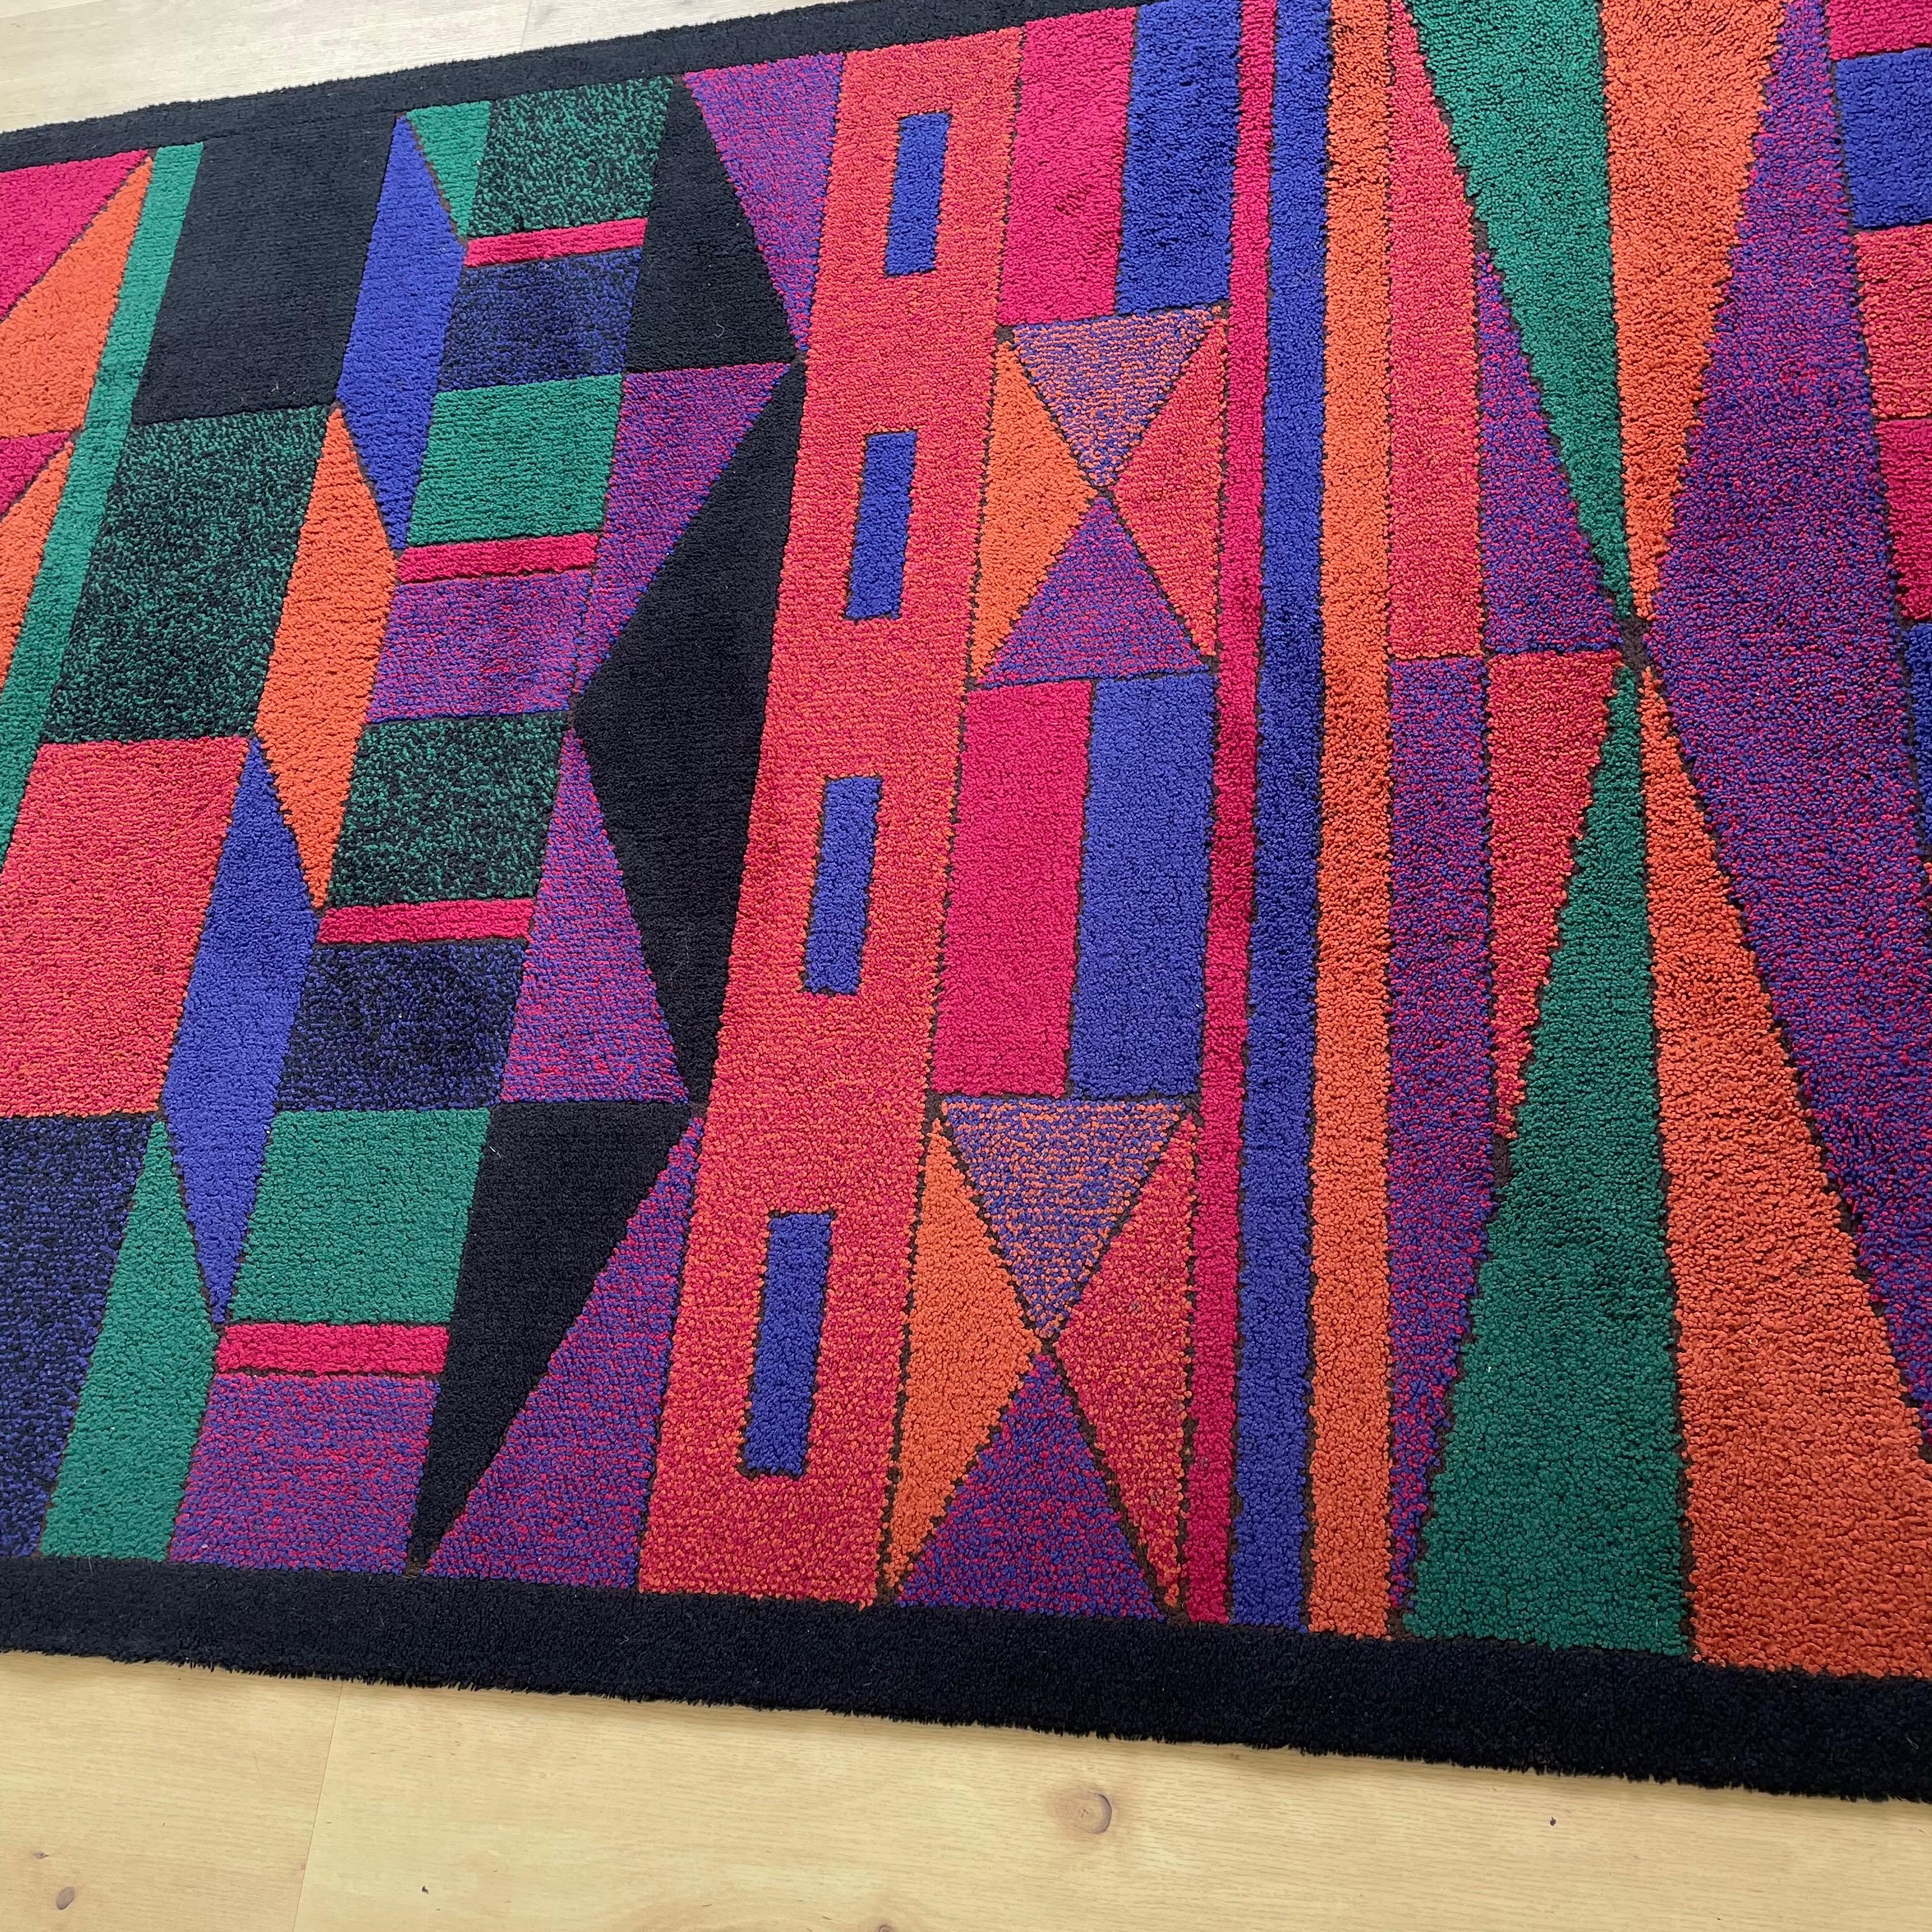 Psychedelic Memphis Style abstract Rug Carpet by Atrium Tefzet, Germany 1980s For Sale 6